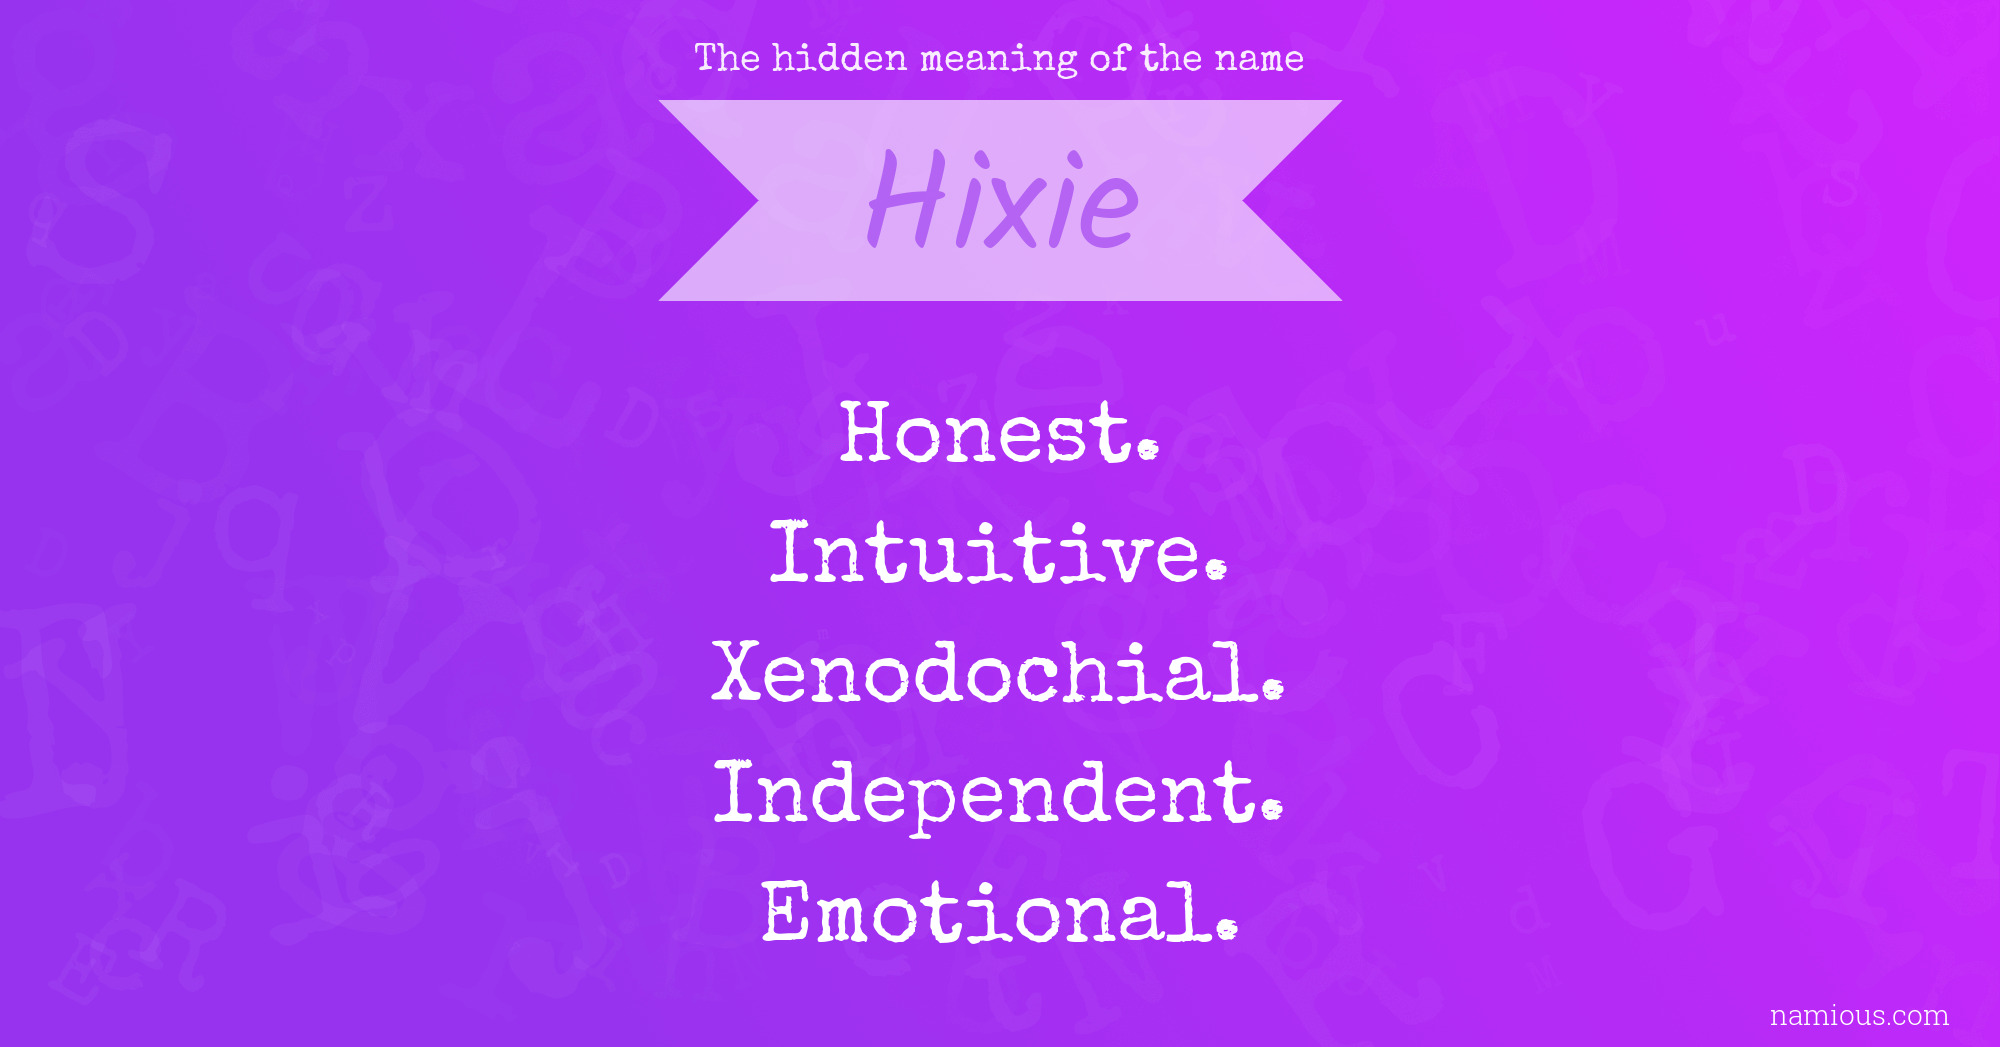 The hidden meaning of the name Hixie